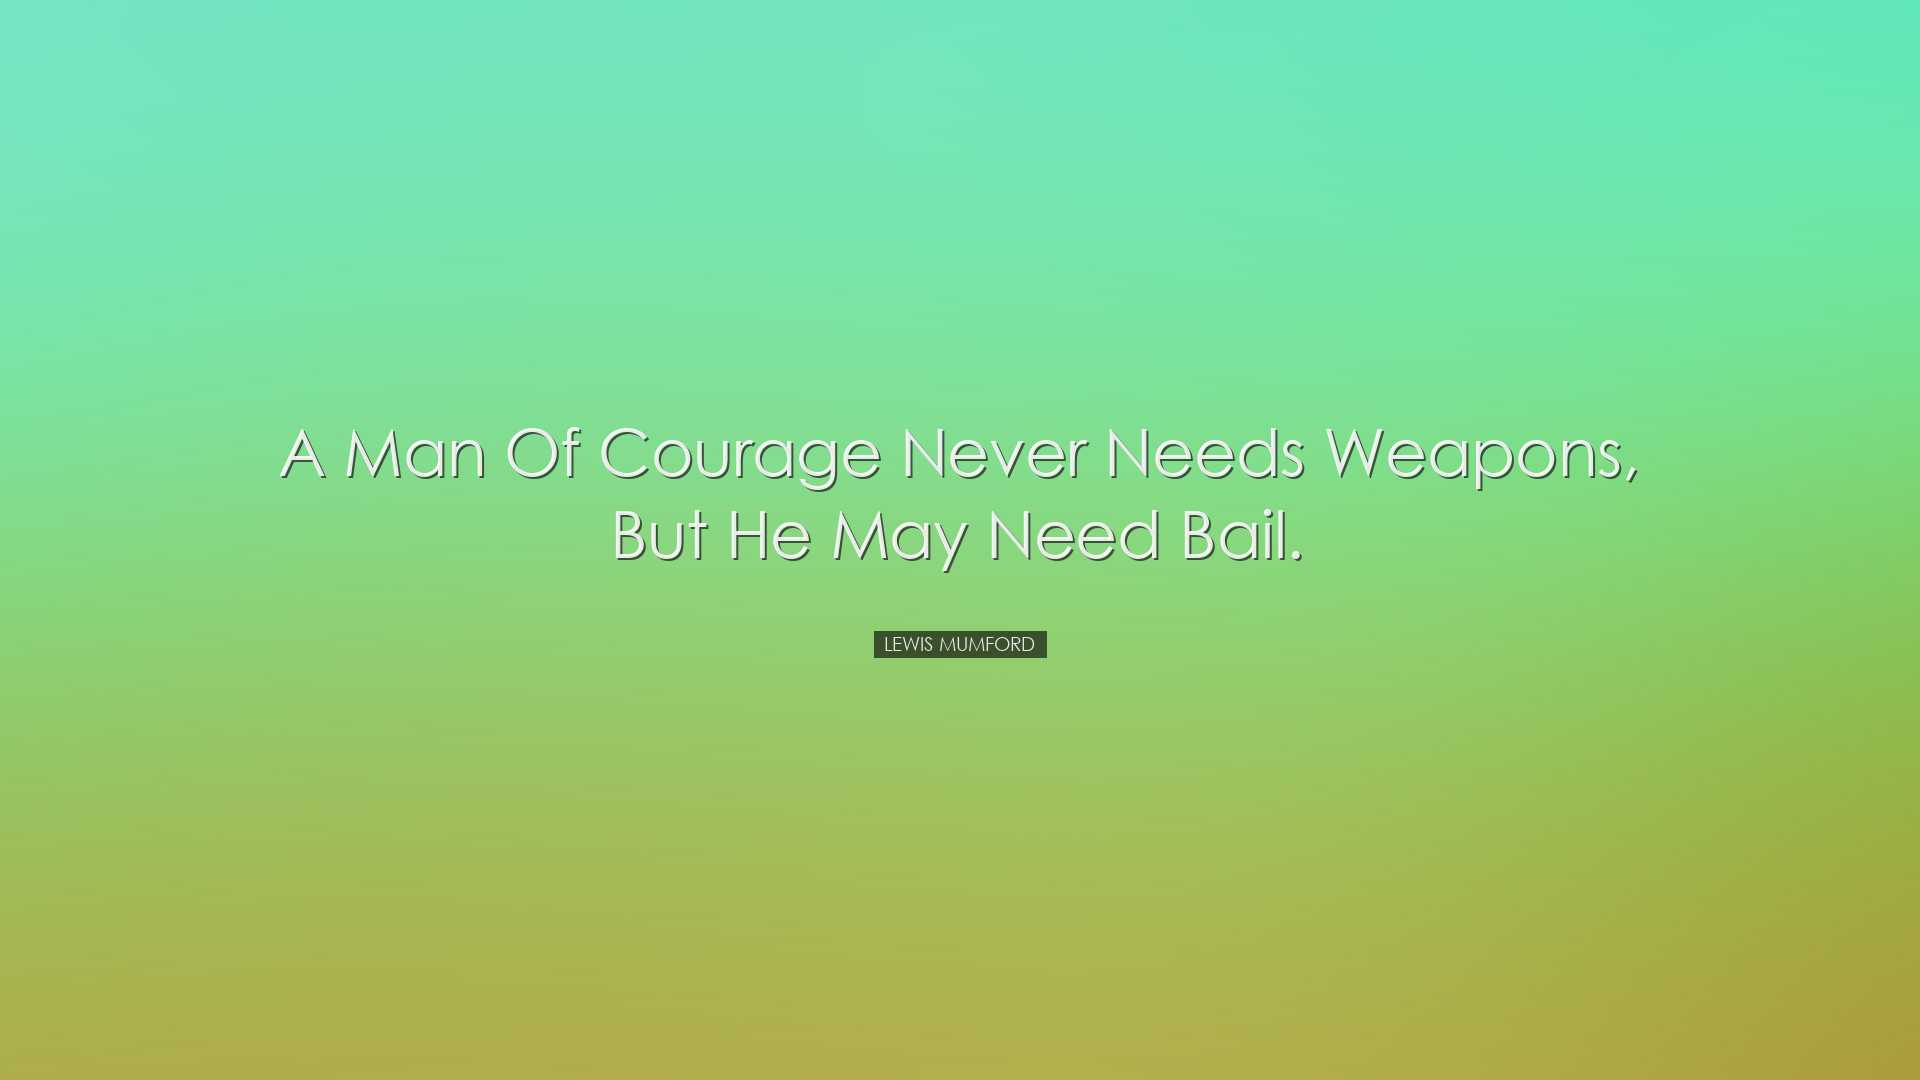 A man of courage never needs weapons, but he may need bail. - Lewi